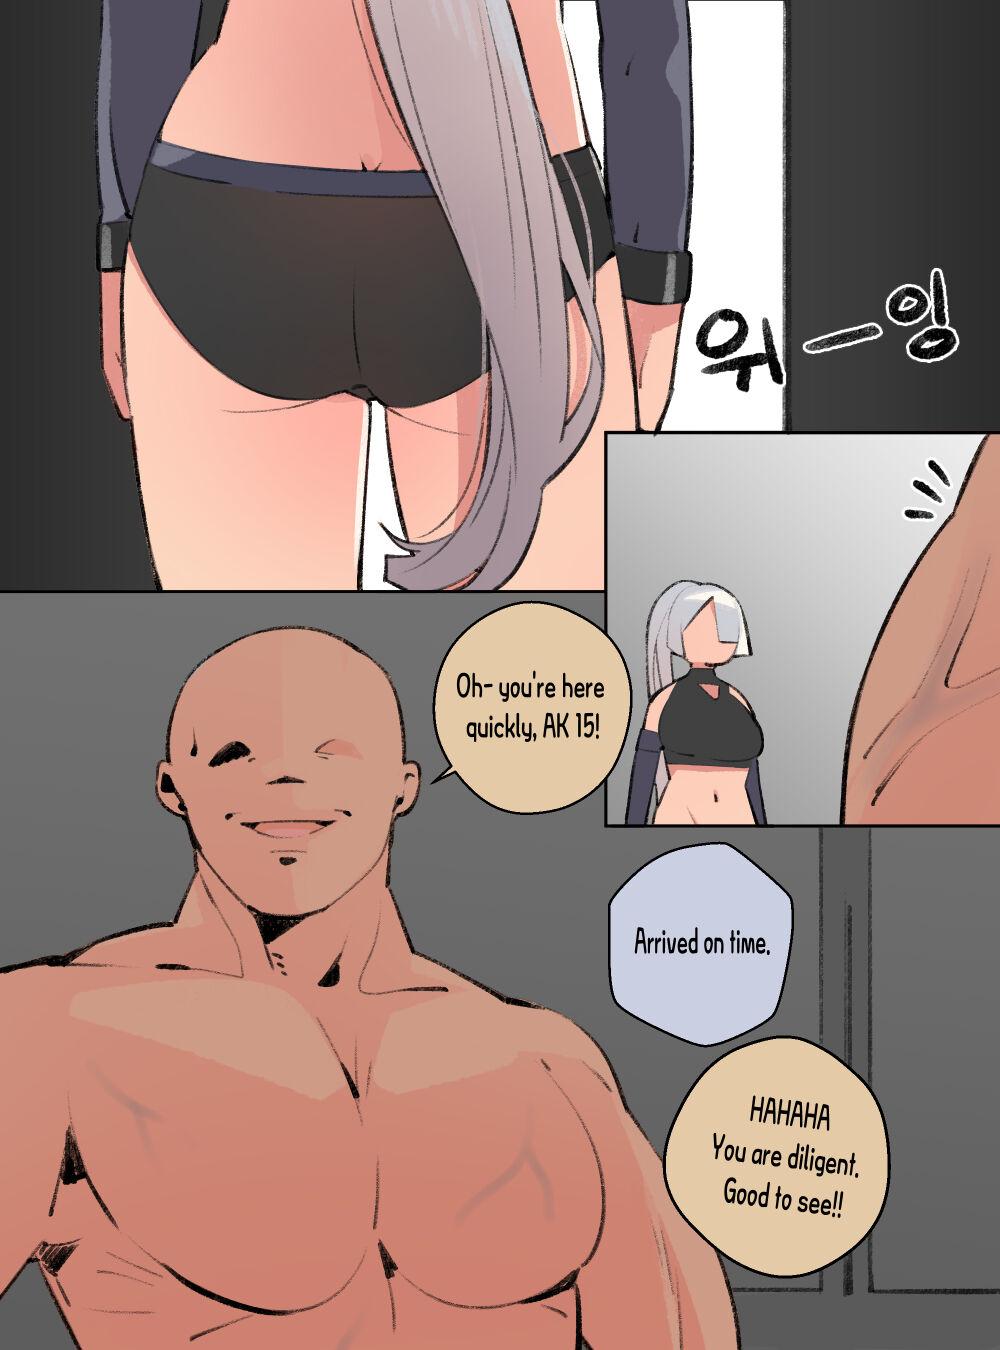 Hungarian Let's exercise with AK15! - Girls frontline Tan - Page 4